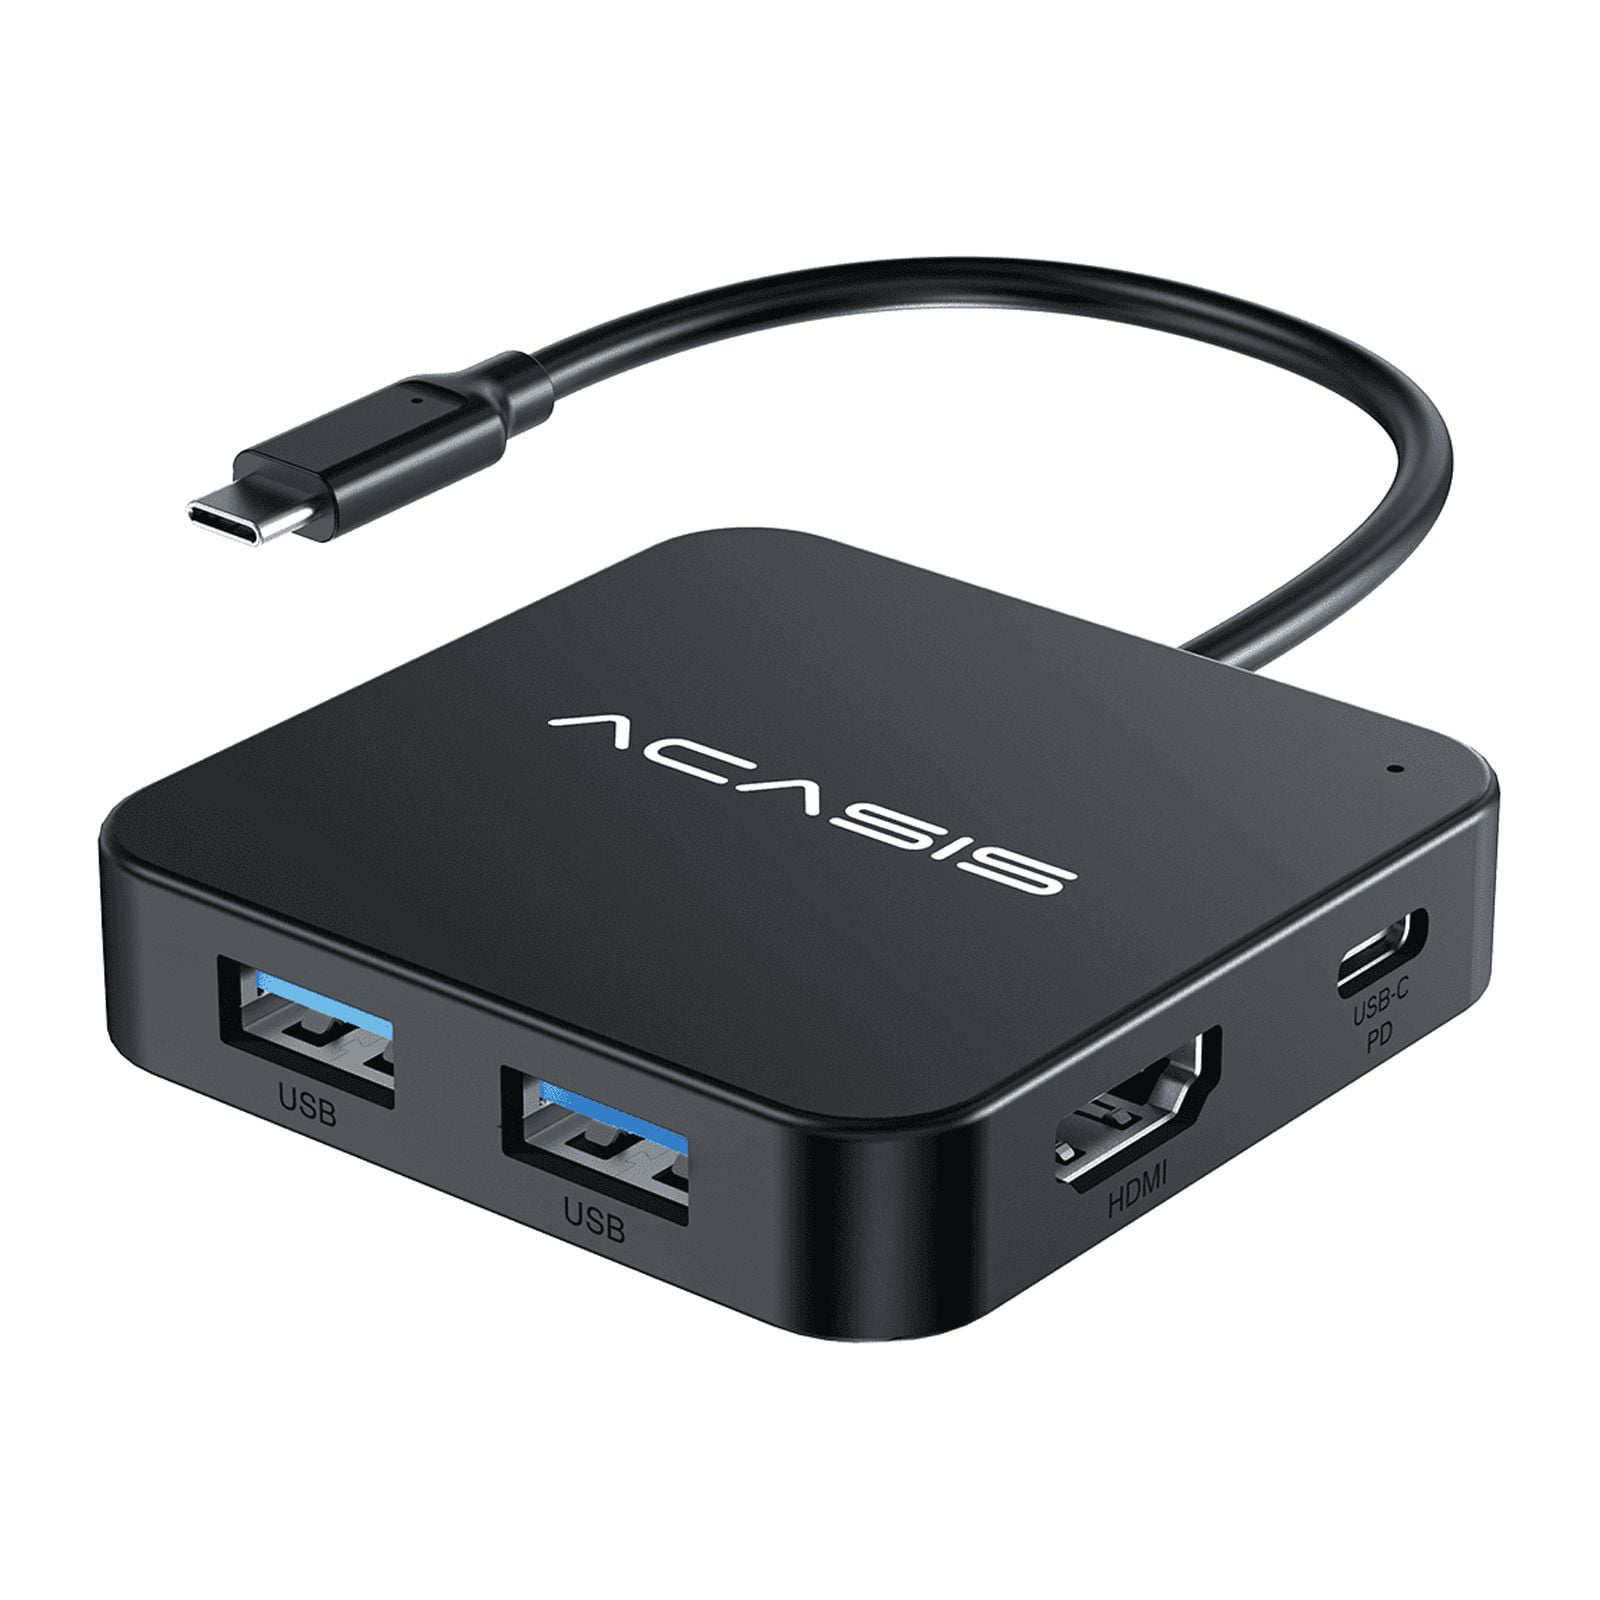 ACASIS USB-C Hub 6 in 1 Multiport Adapter with 4K HDMI, Power Delivery 100W, 3 USB A 3.0 Ports